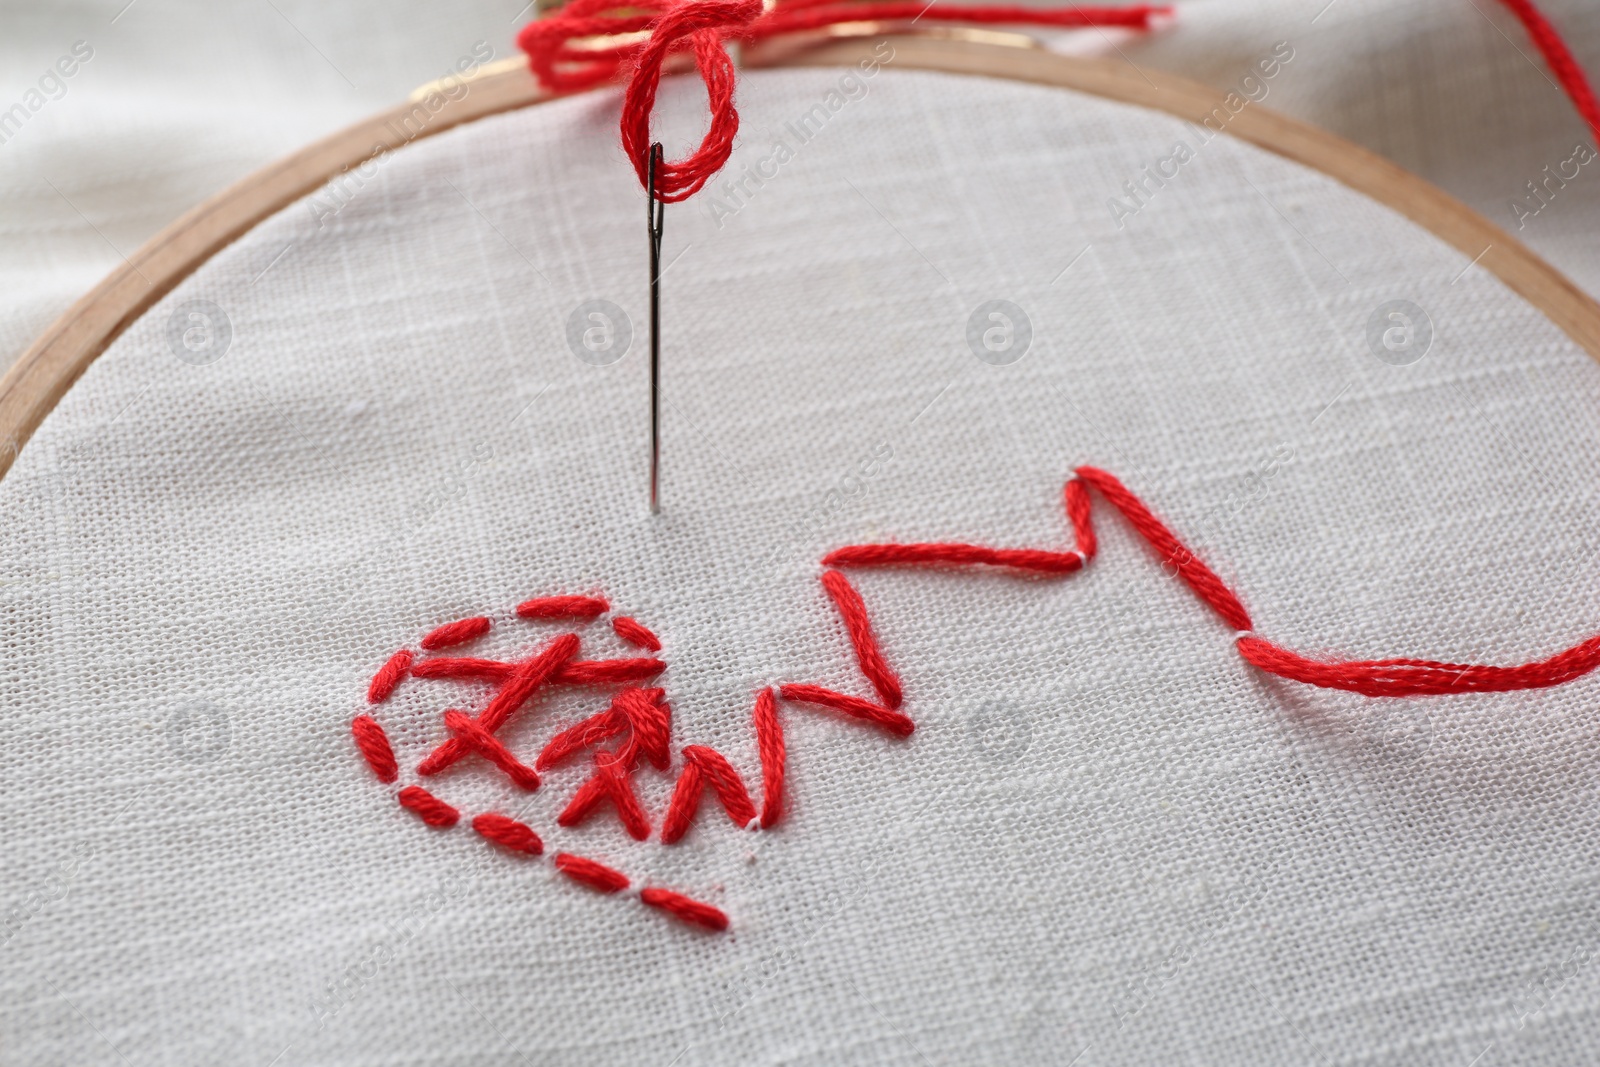 Photo of Sewing needle with thread and stitches on light cloth, closeup